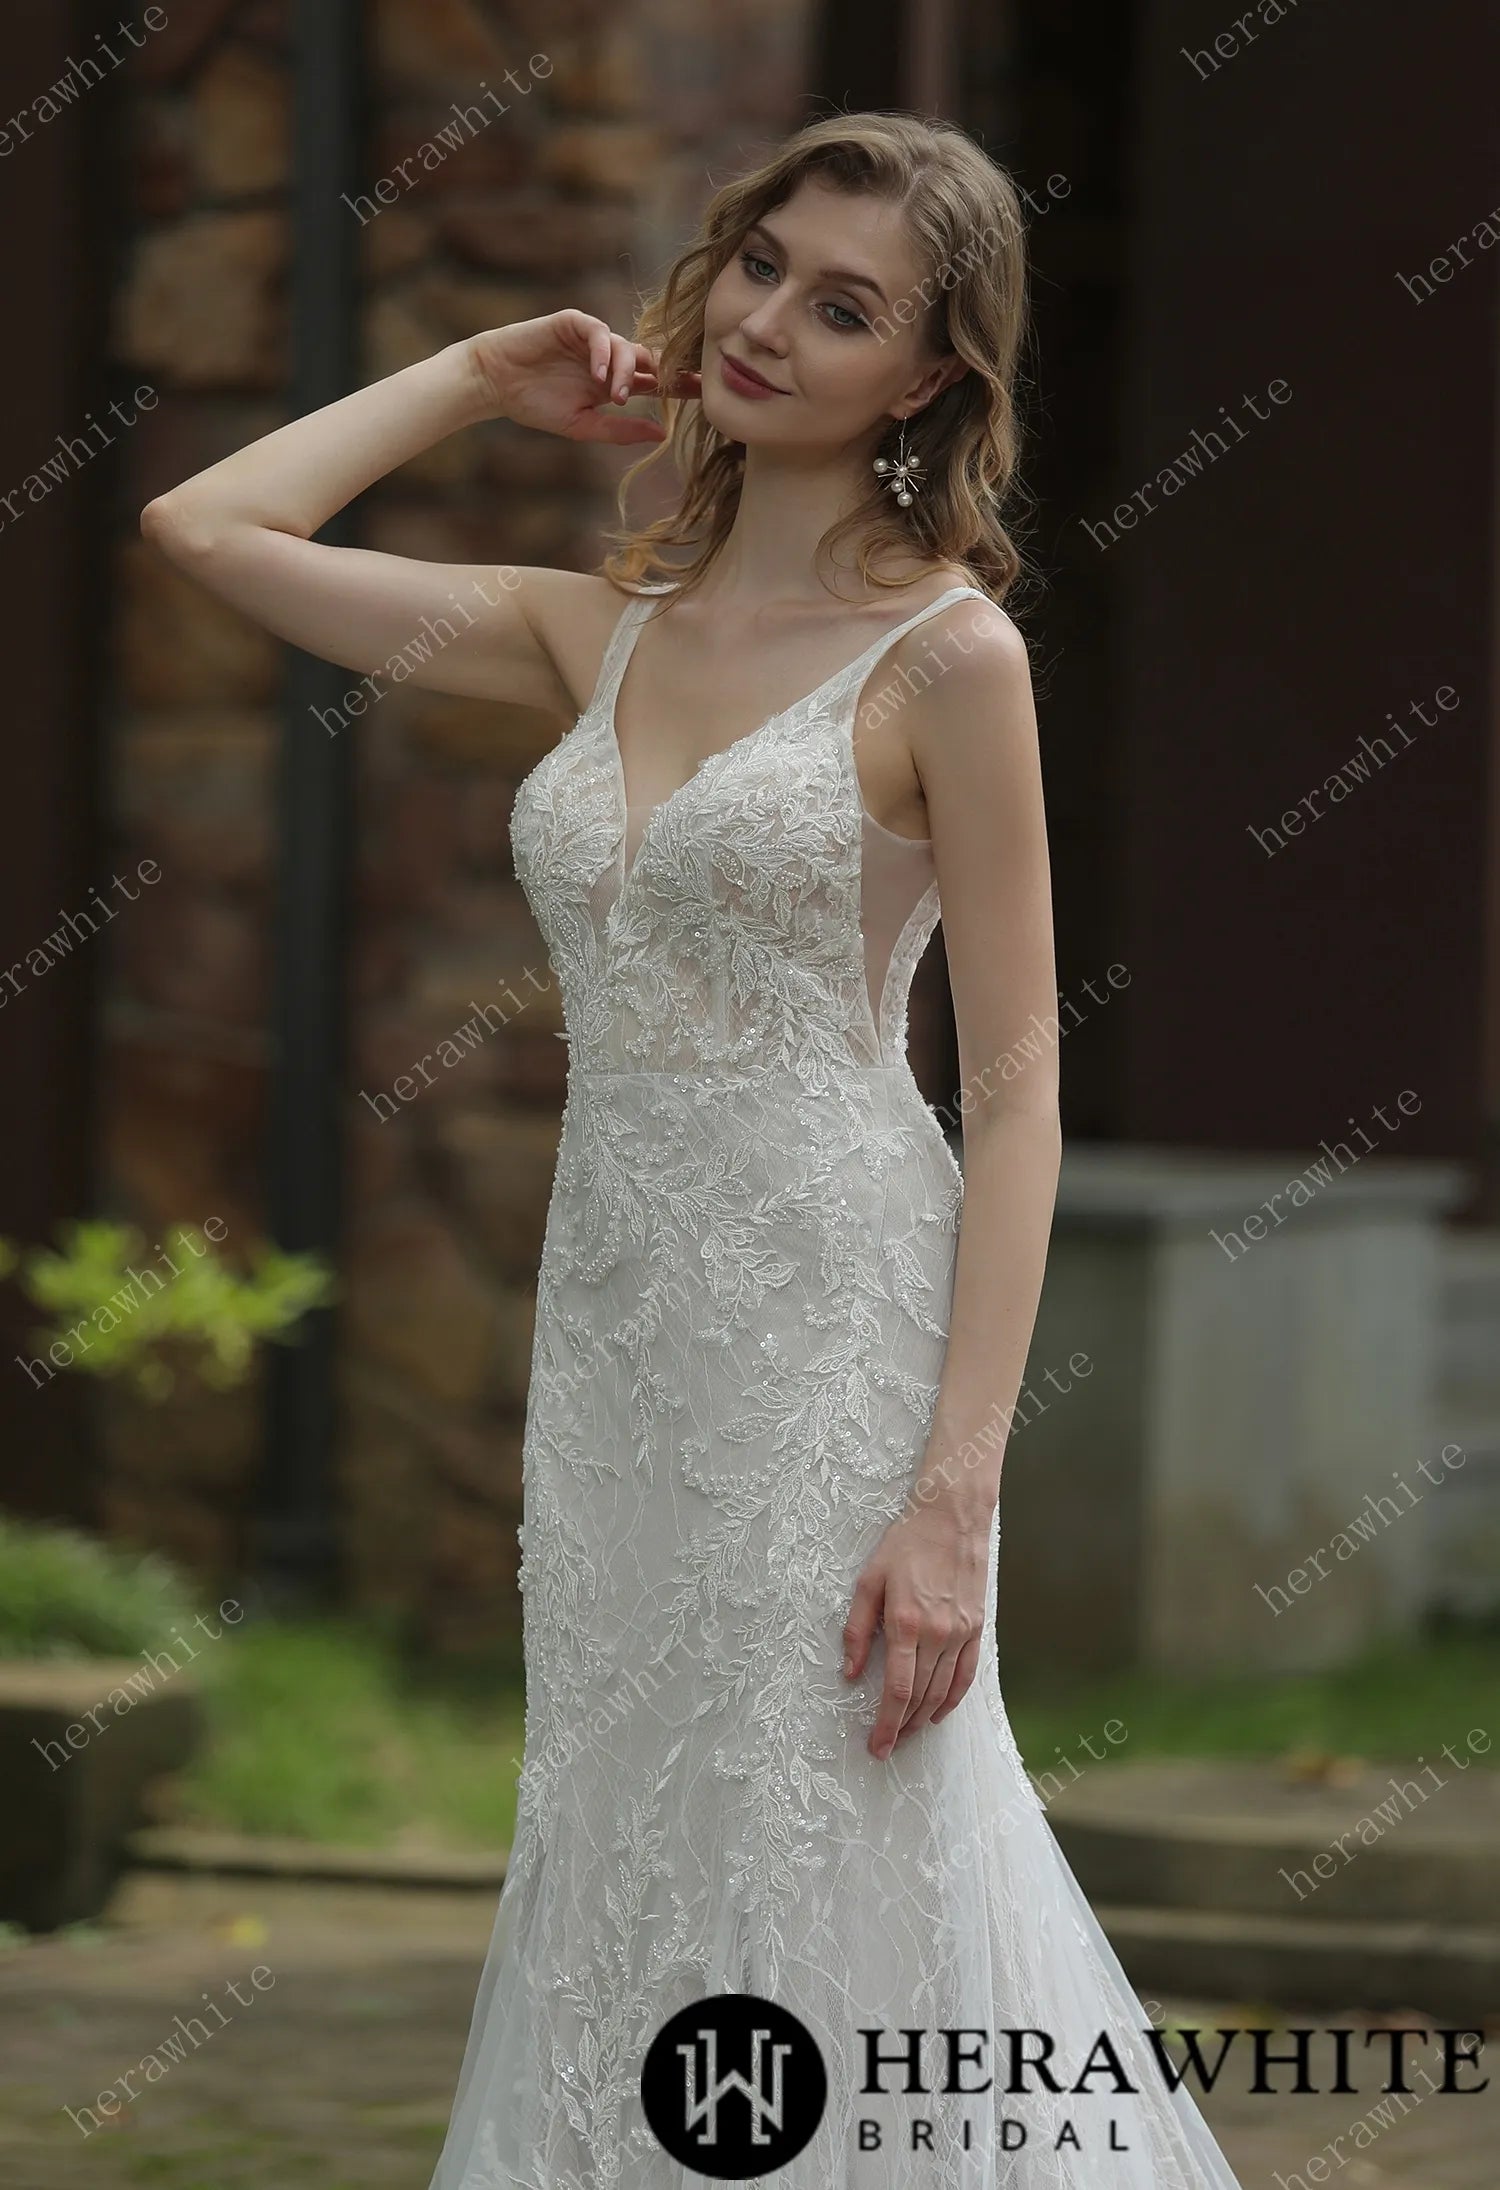 Classic V-Neck Allover Lace Fit And Flare Wedding Dress